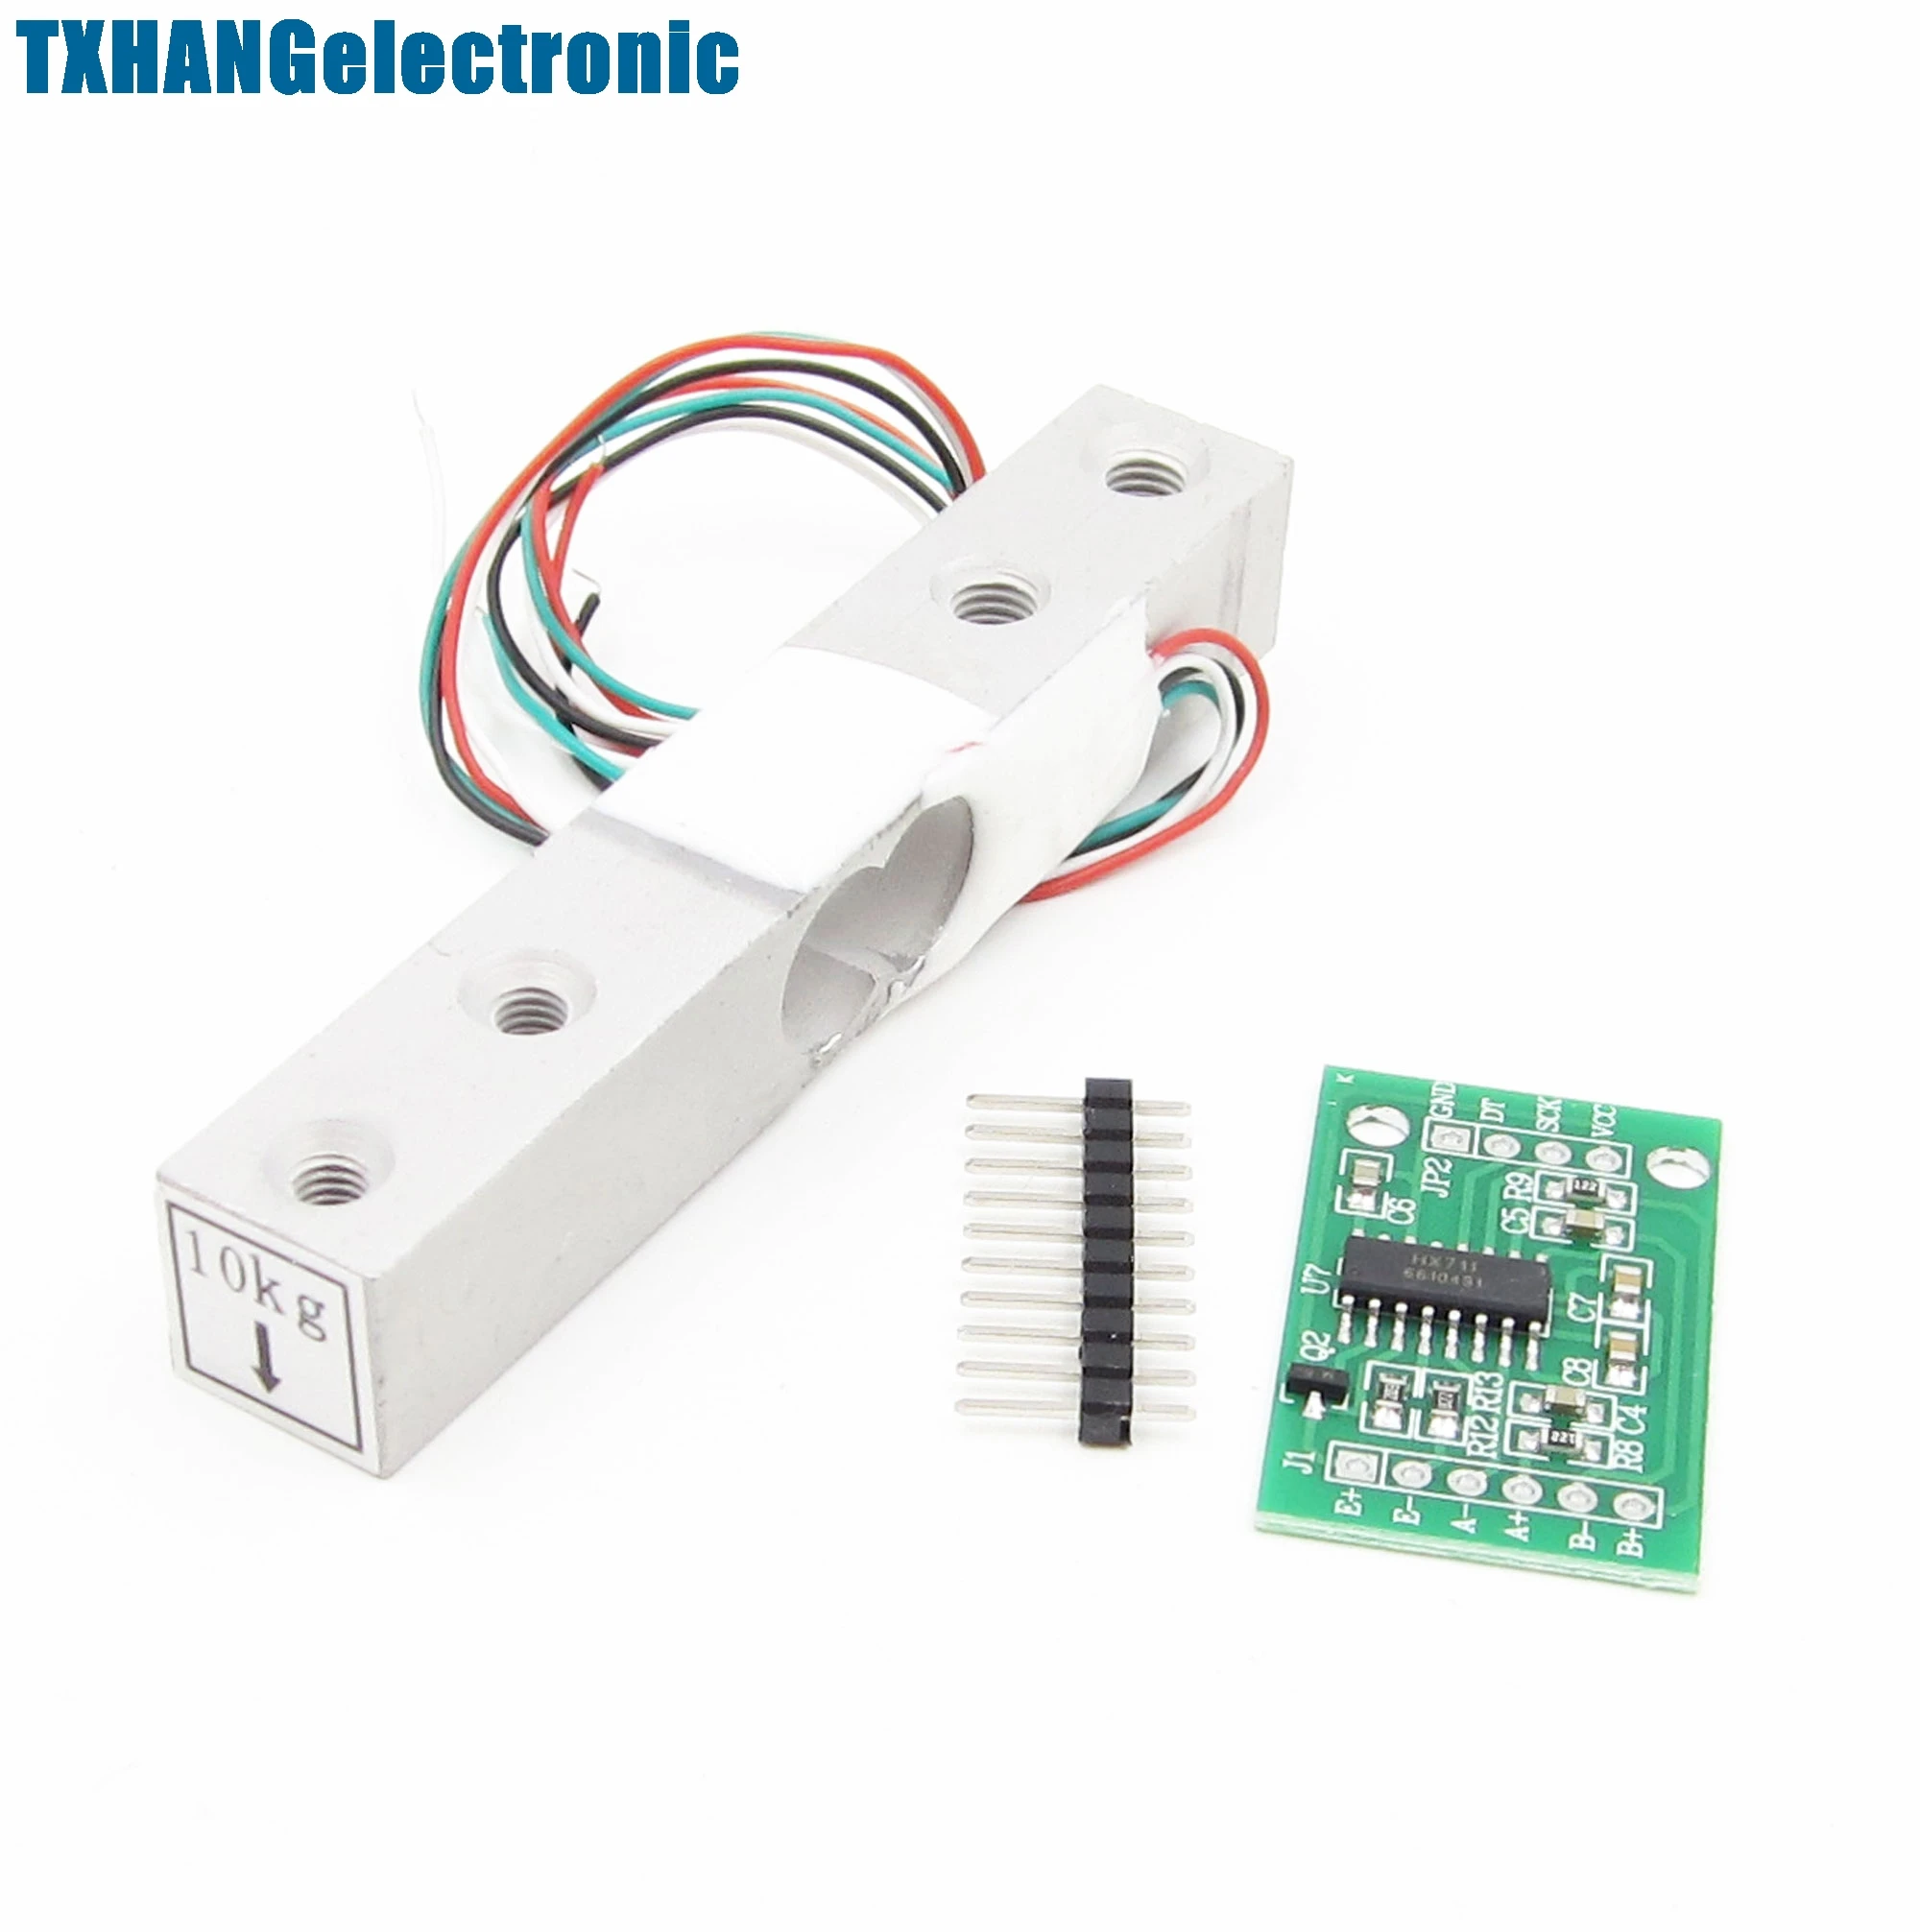 Details about   Digital Portable 10KG Electronic Scale Load Cell Weight Weighing Sensor Module 